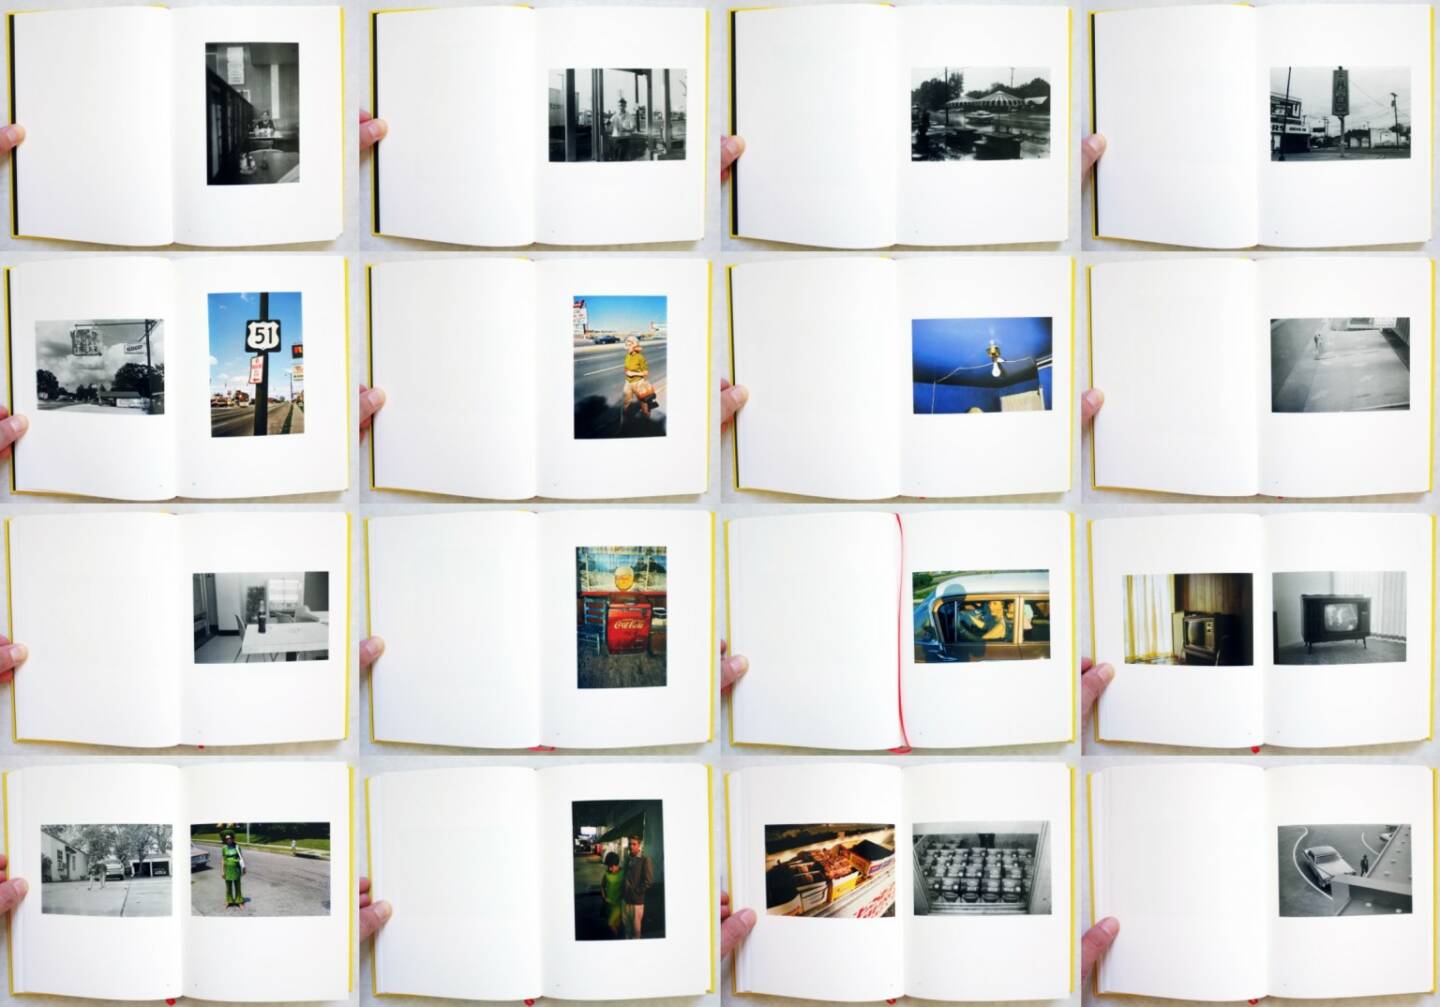 William Eggleston - From Black & White to Color, Steidl, 2014, Beispielseiten, sample spreads -http://josefchladek.com/book/william_eggleston_-_from_black_white_to_color